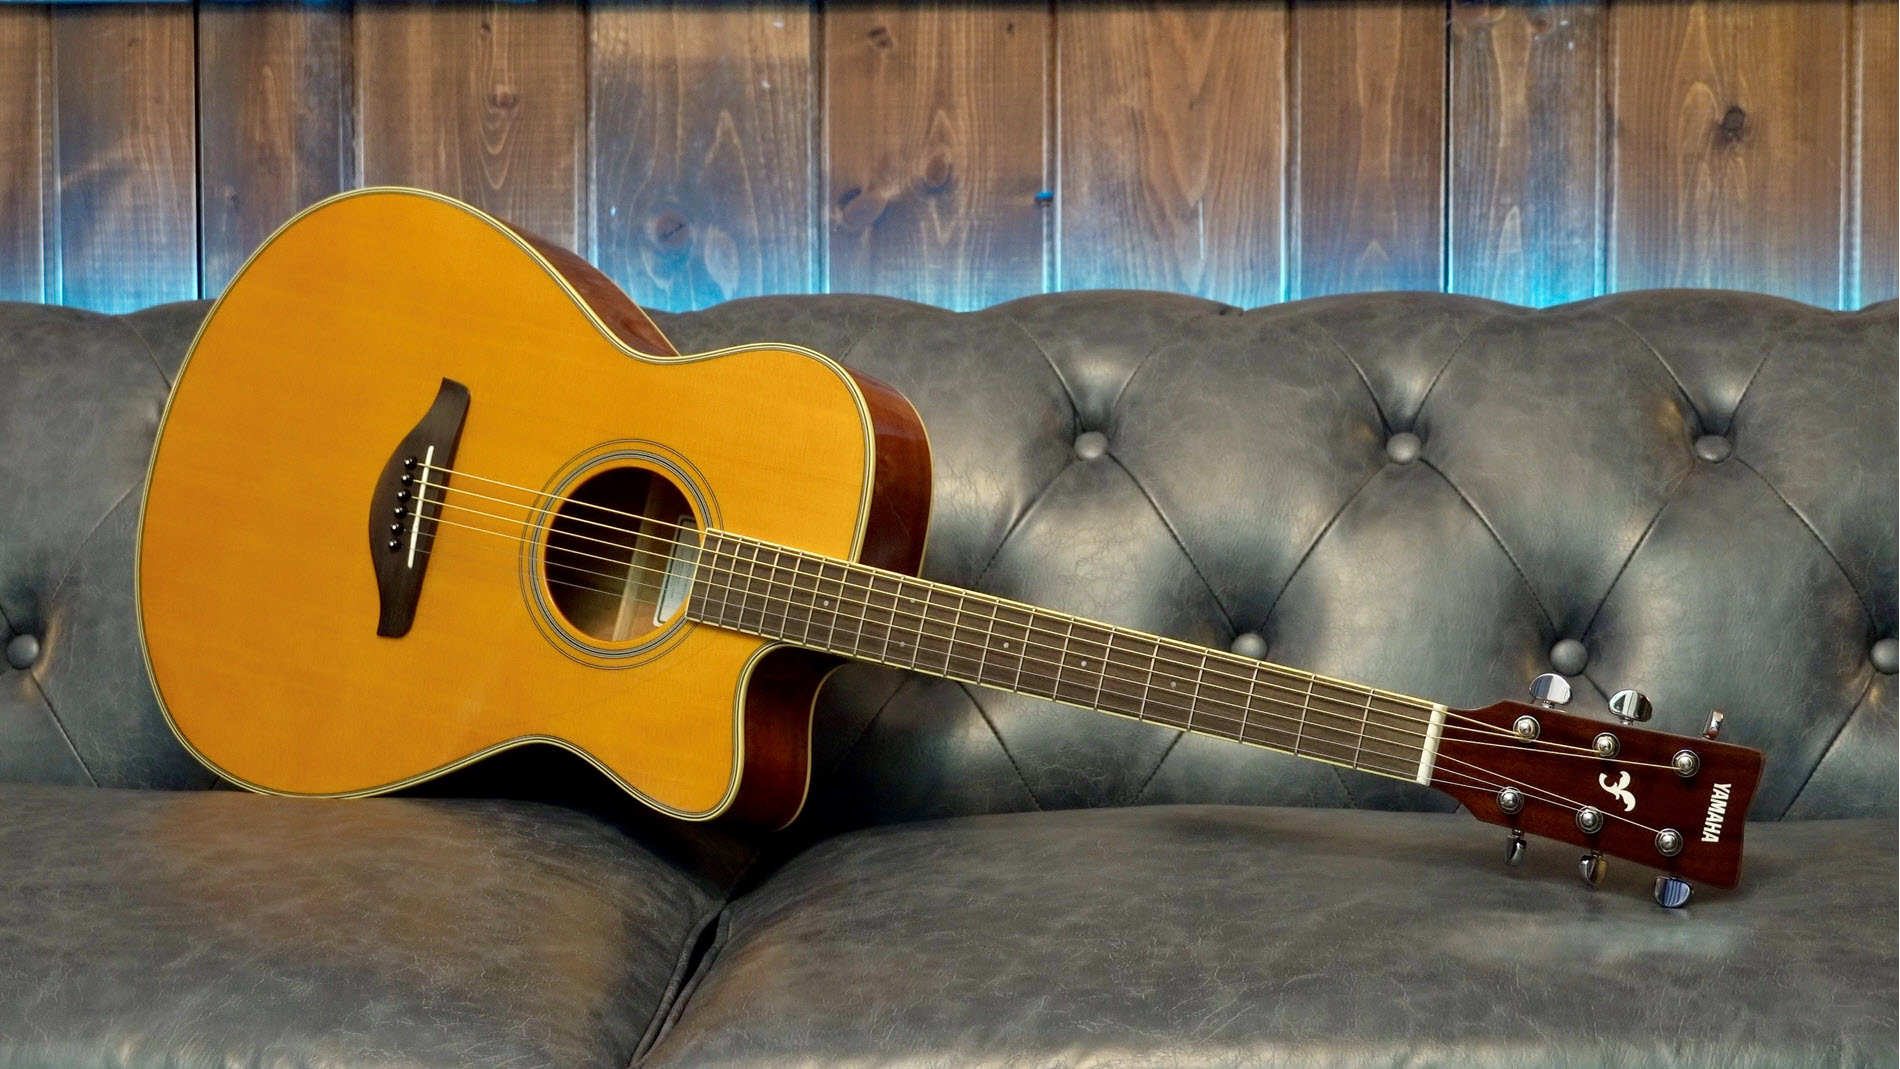 Acoustic guitar on its side on a leather couch.